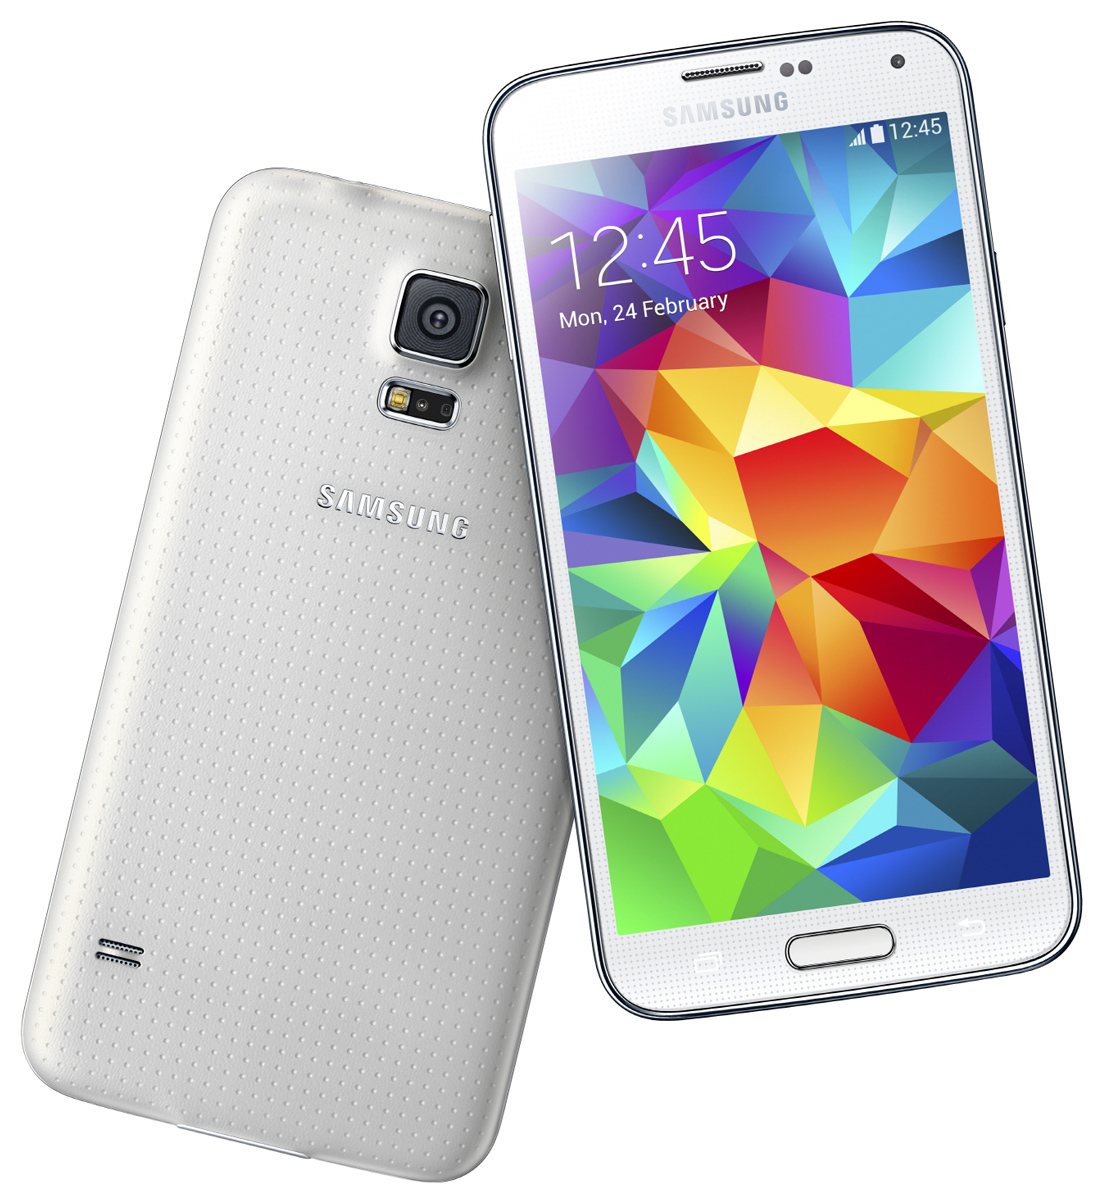 Samsung Galaxy S5 Full Phone Specifications Comparison